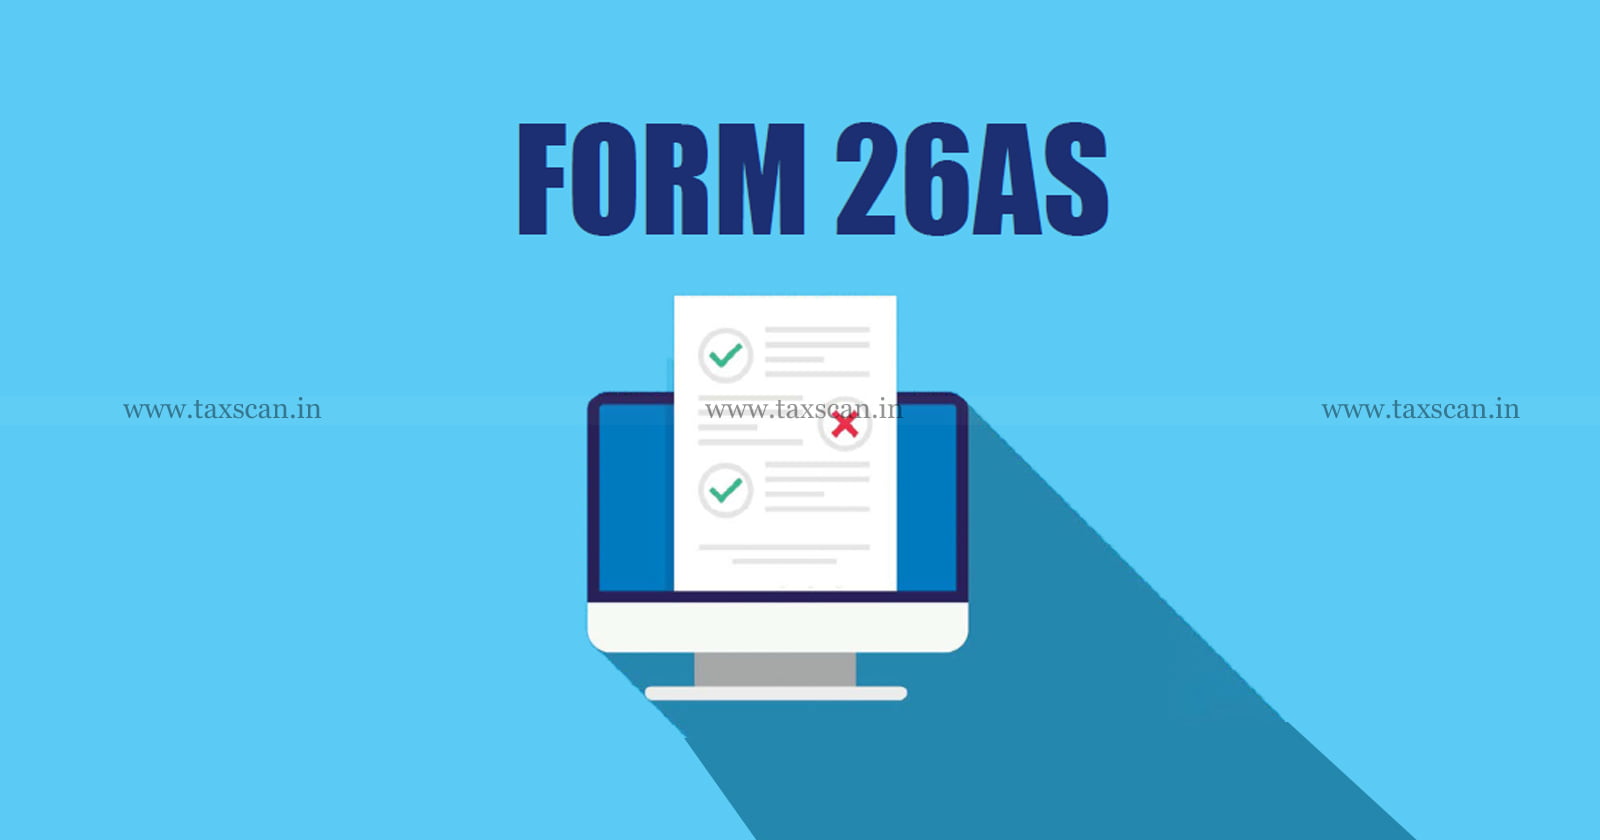 Income Tax Update - Form 26AS - TDS - TCS - Other taxes - Refunds - AIS - Taxscan